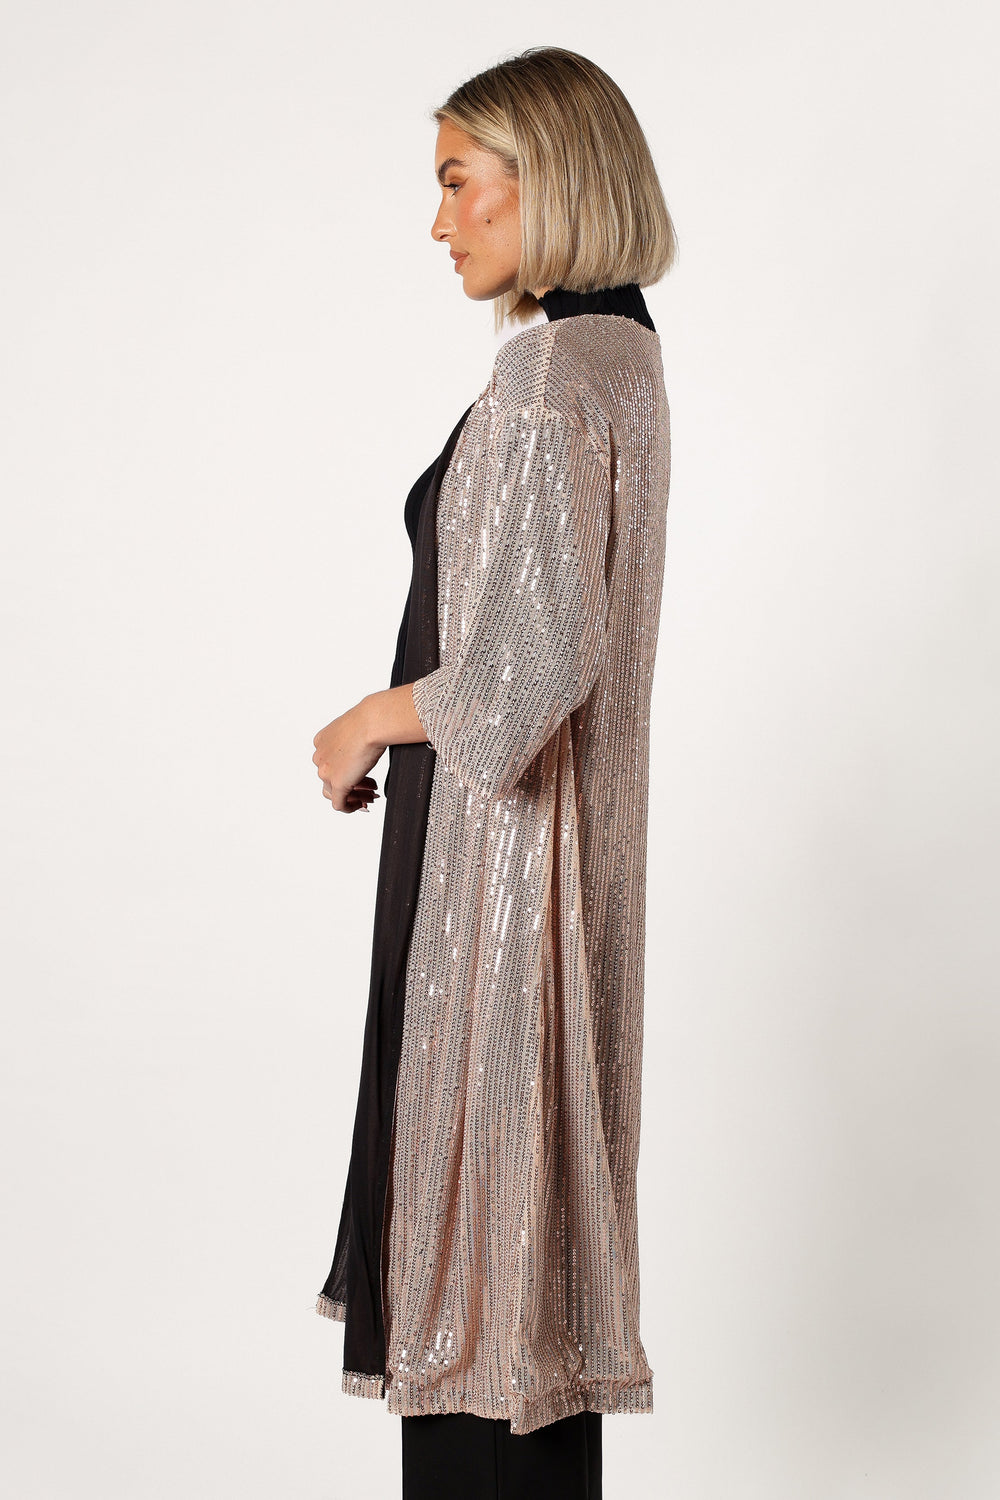 Petal and Pup USA OUTERWEAR Jayleen Sequin Duster - Gold